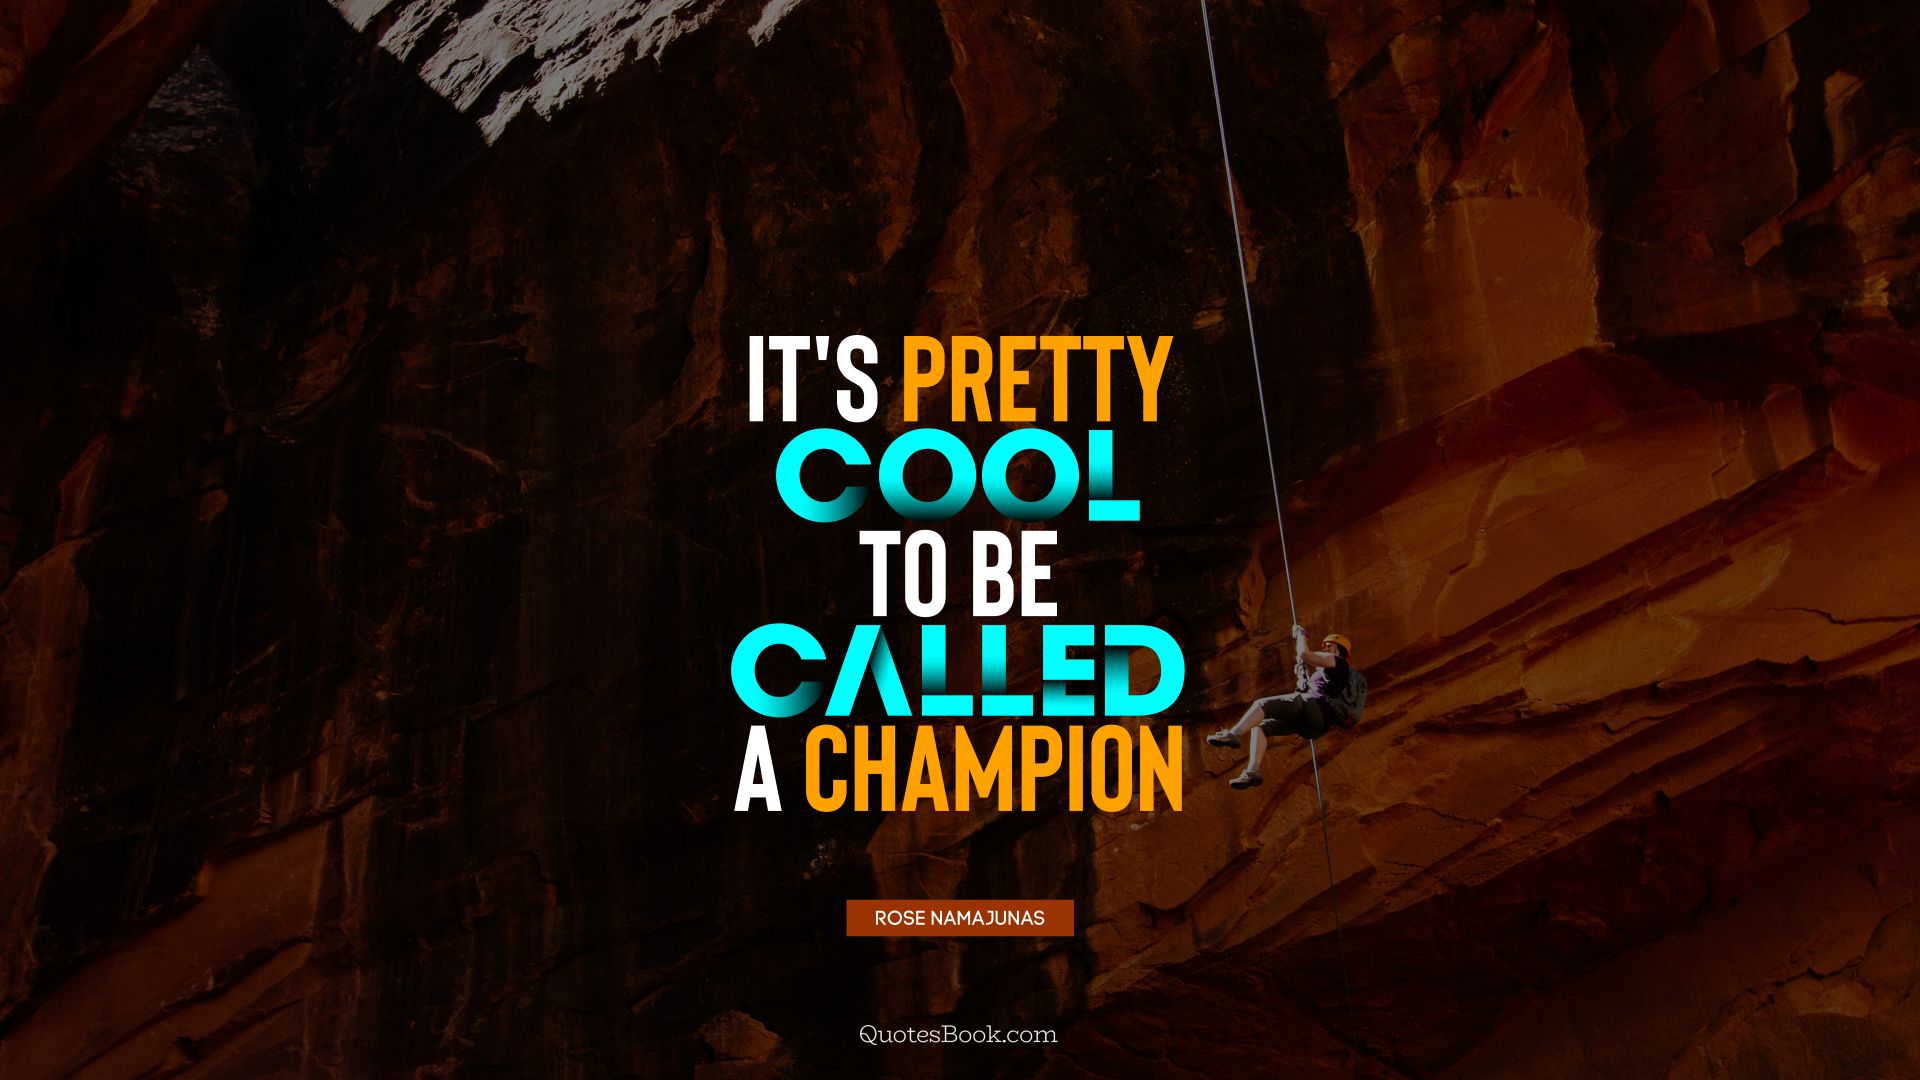 It's pretty cool to be called a champion. - Quote by Rose Namajunas